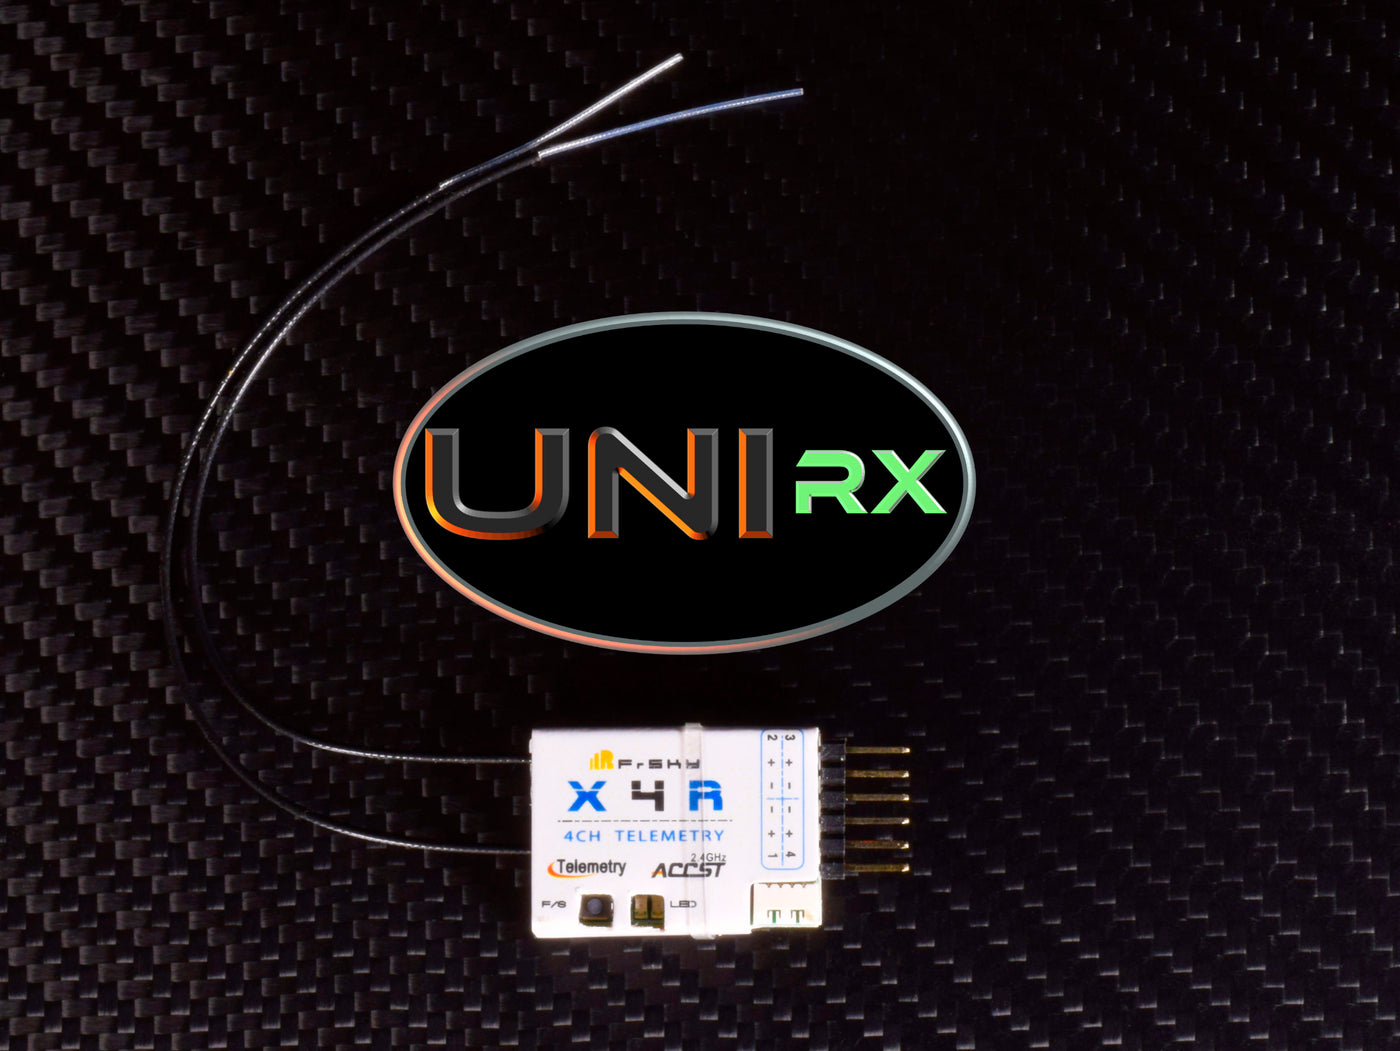 FrSky X4R (With Uni-RX firmware)